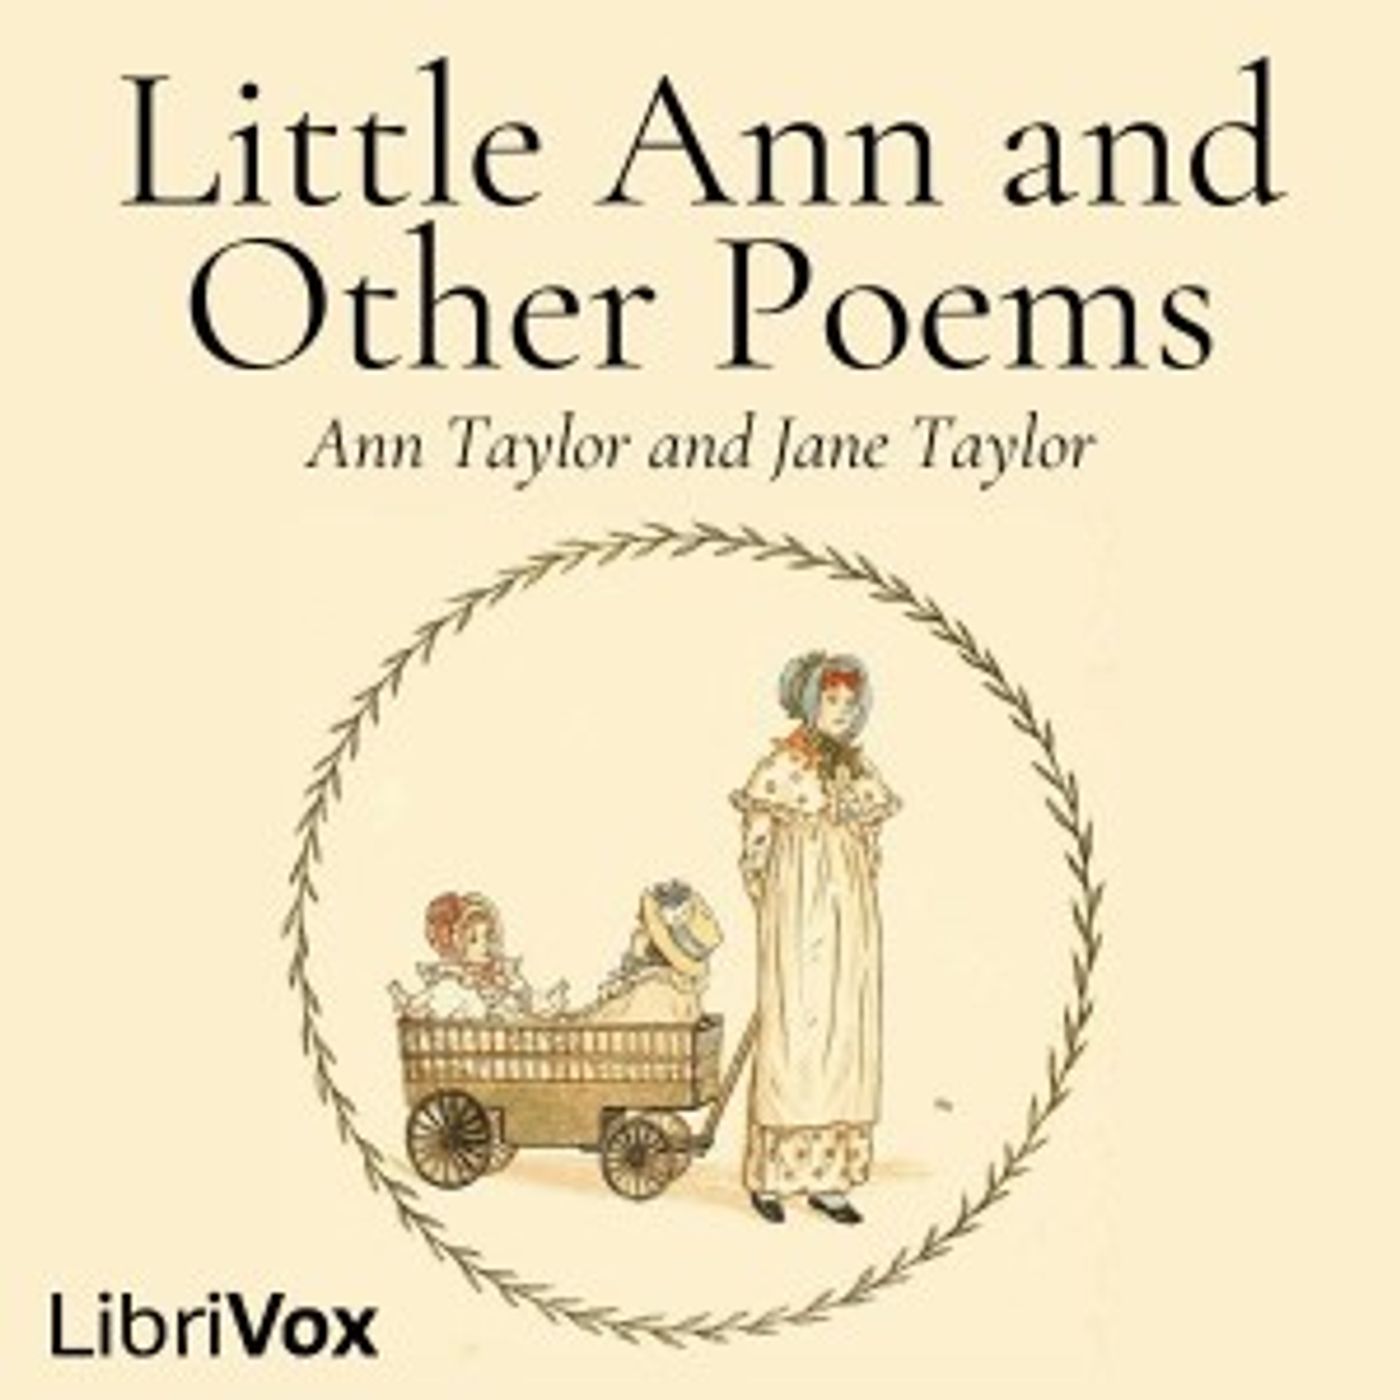 Little Ann and Other Poems by Ann Taylor (1782 – 1866) and Jane Taylor (1783 – 1824)